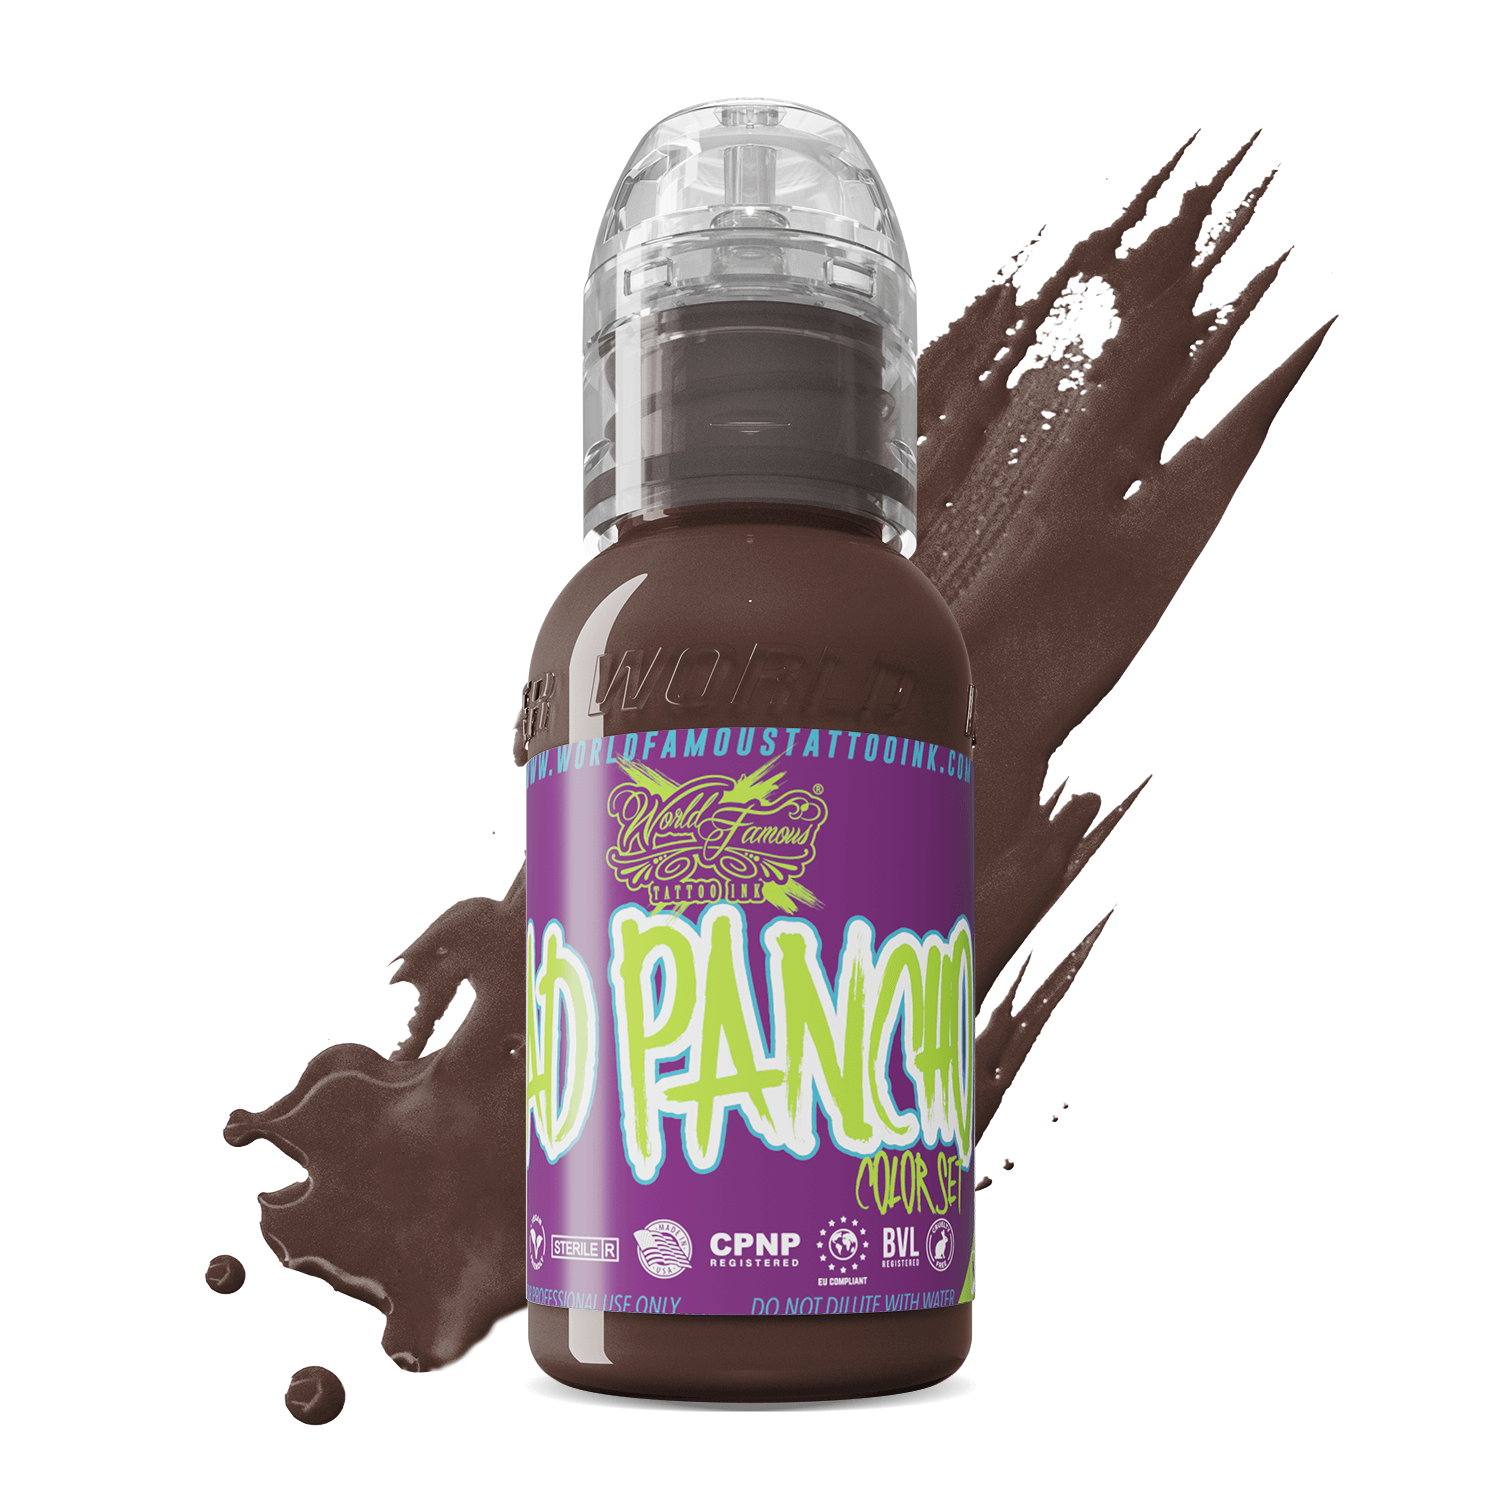 A.D. Pancho Proteam Color - Brown | World Famous Tattoo Ink